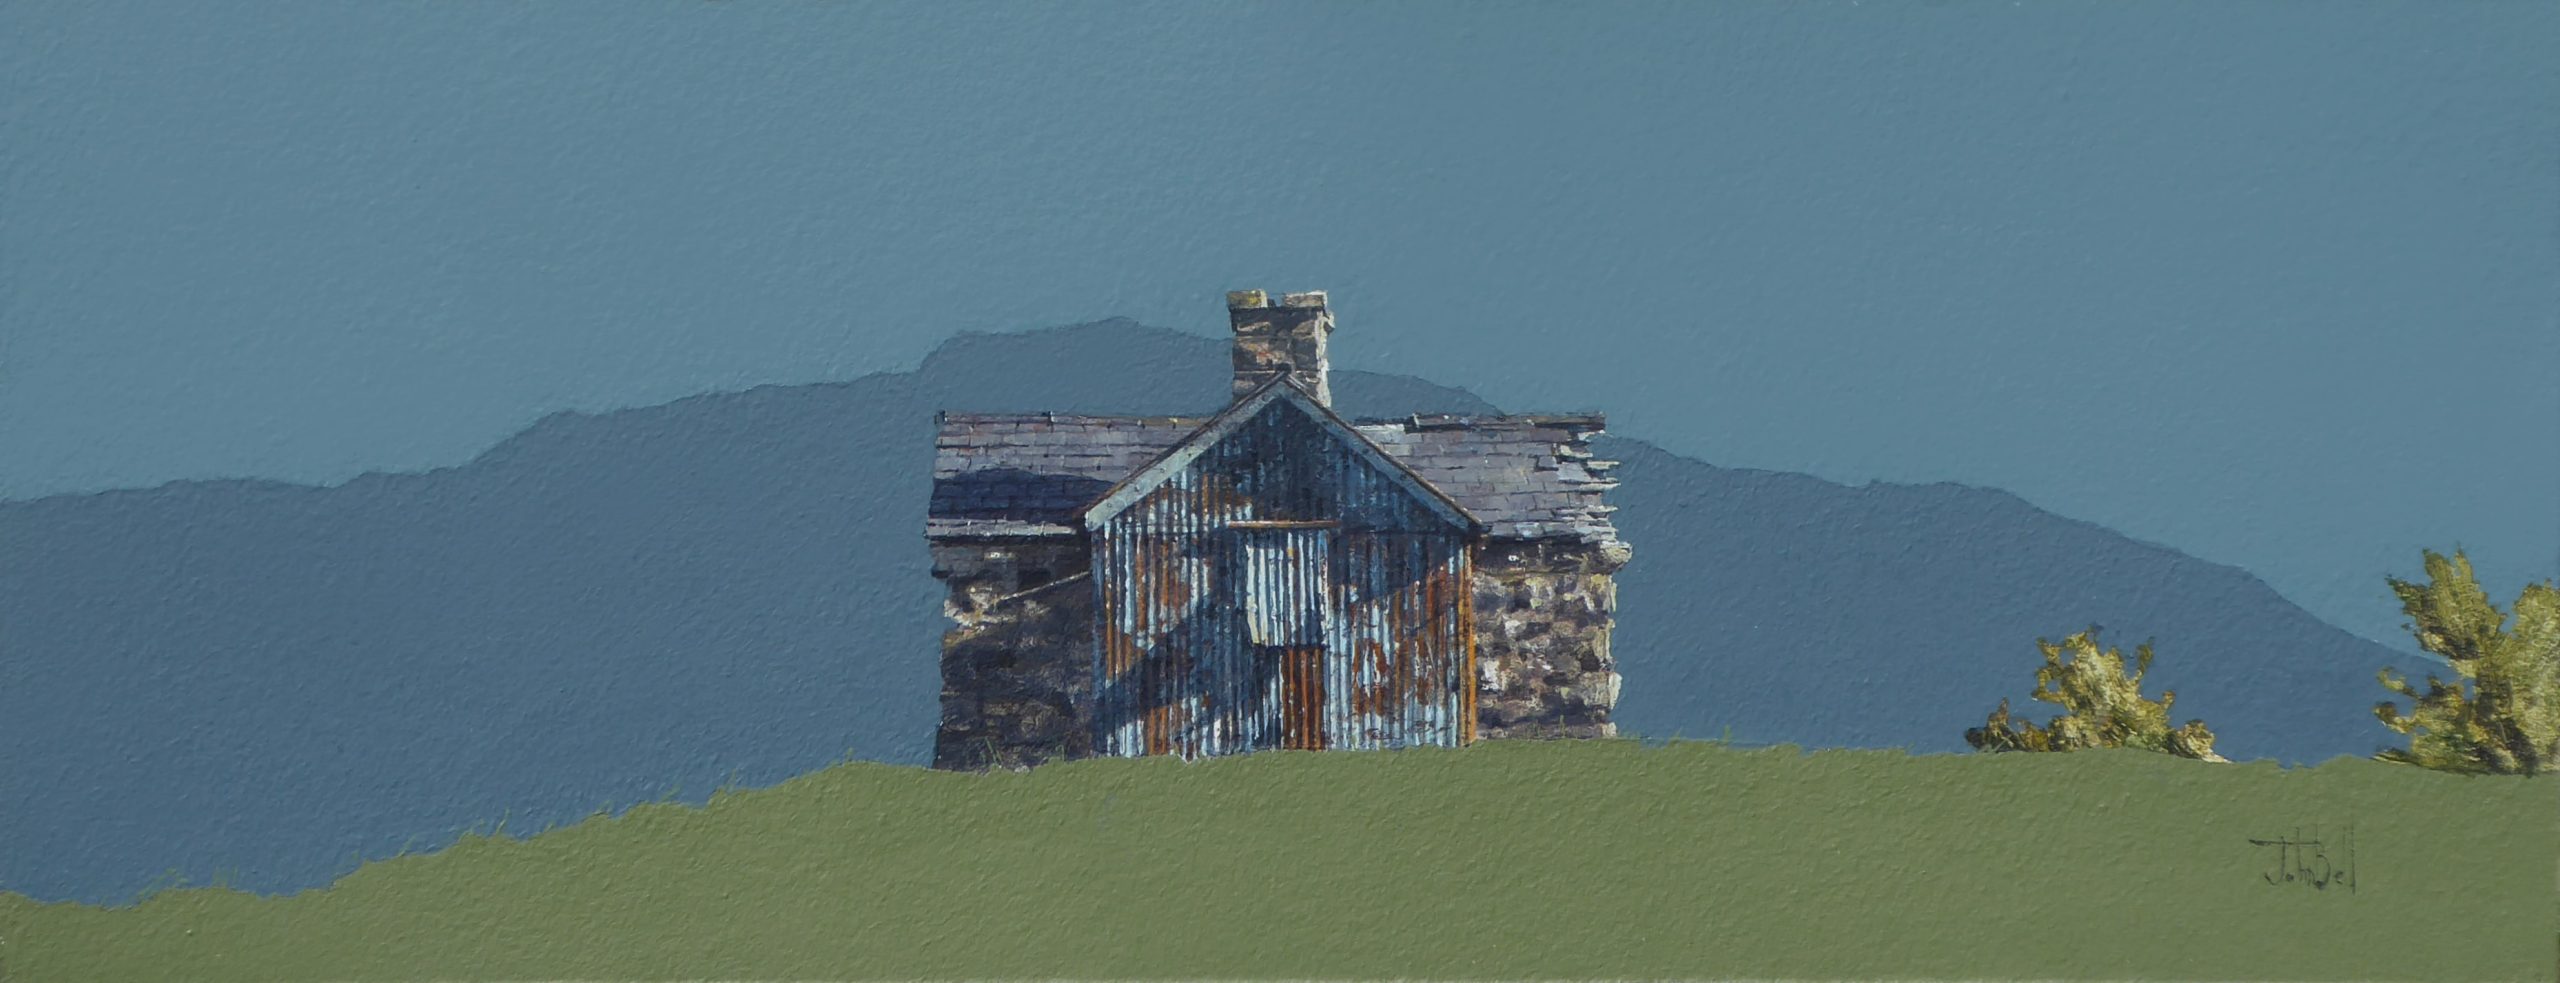 Bothy on a Knoll, Elphin (size 18 x 7 inches)-min